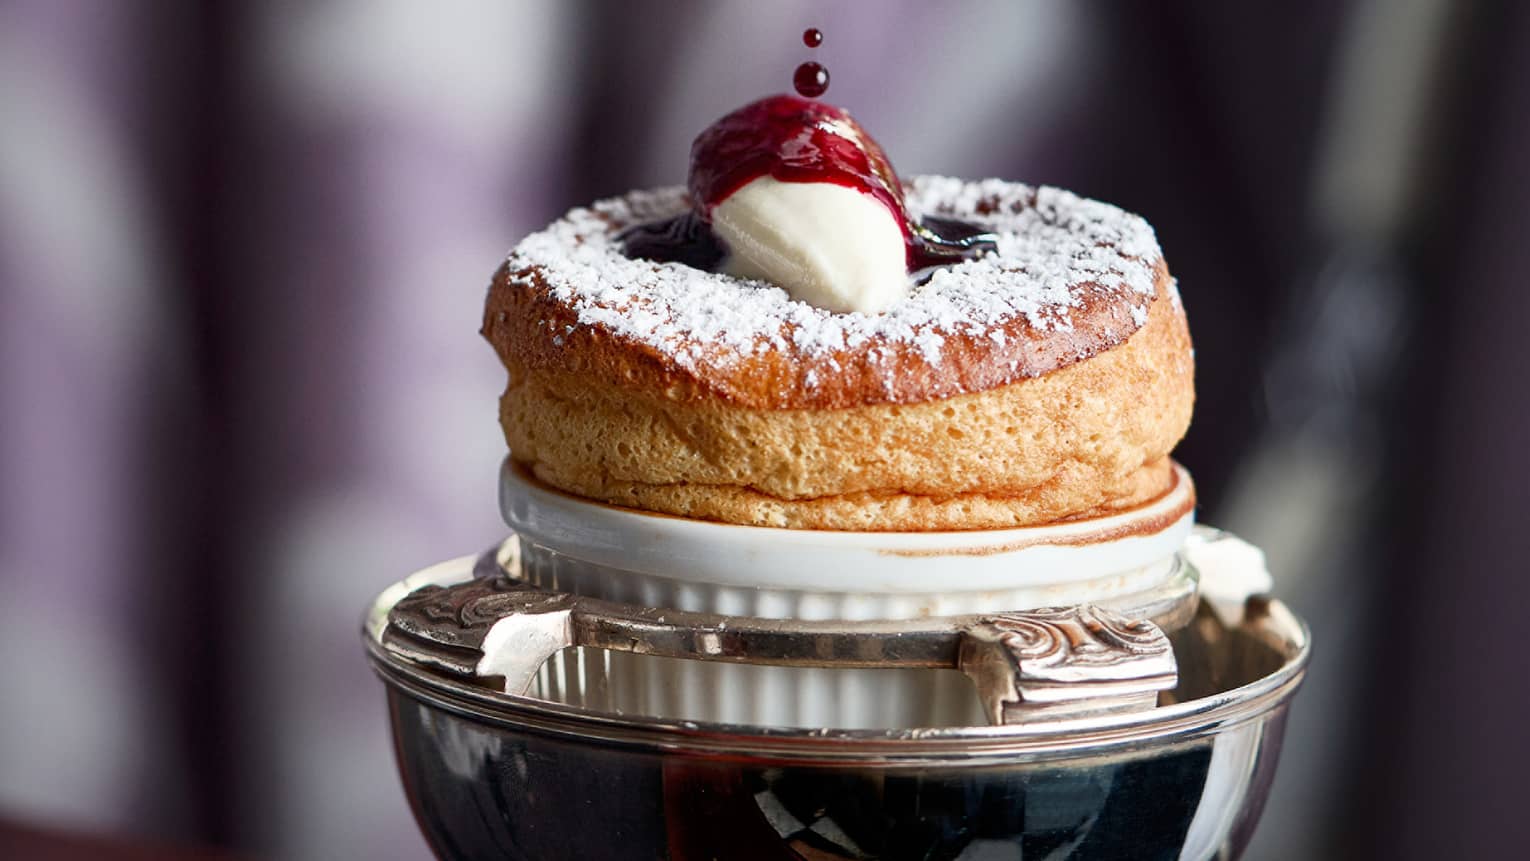 Souffl� with a berry compote.